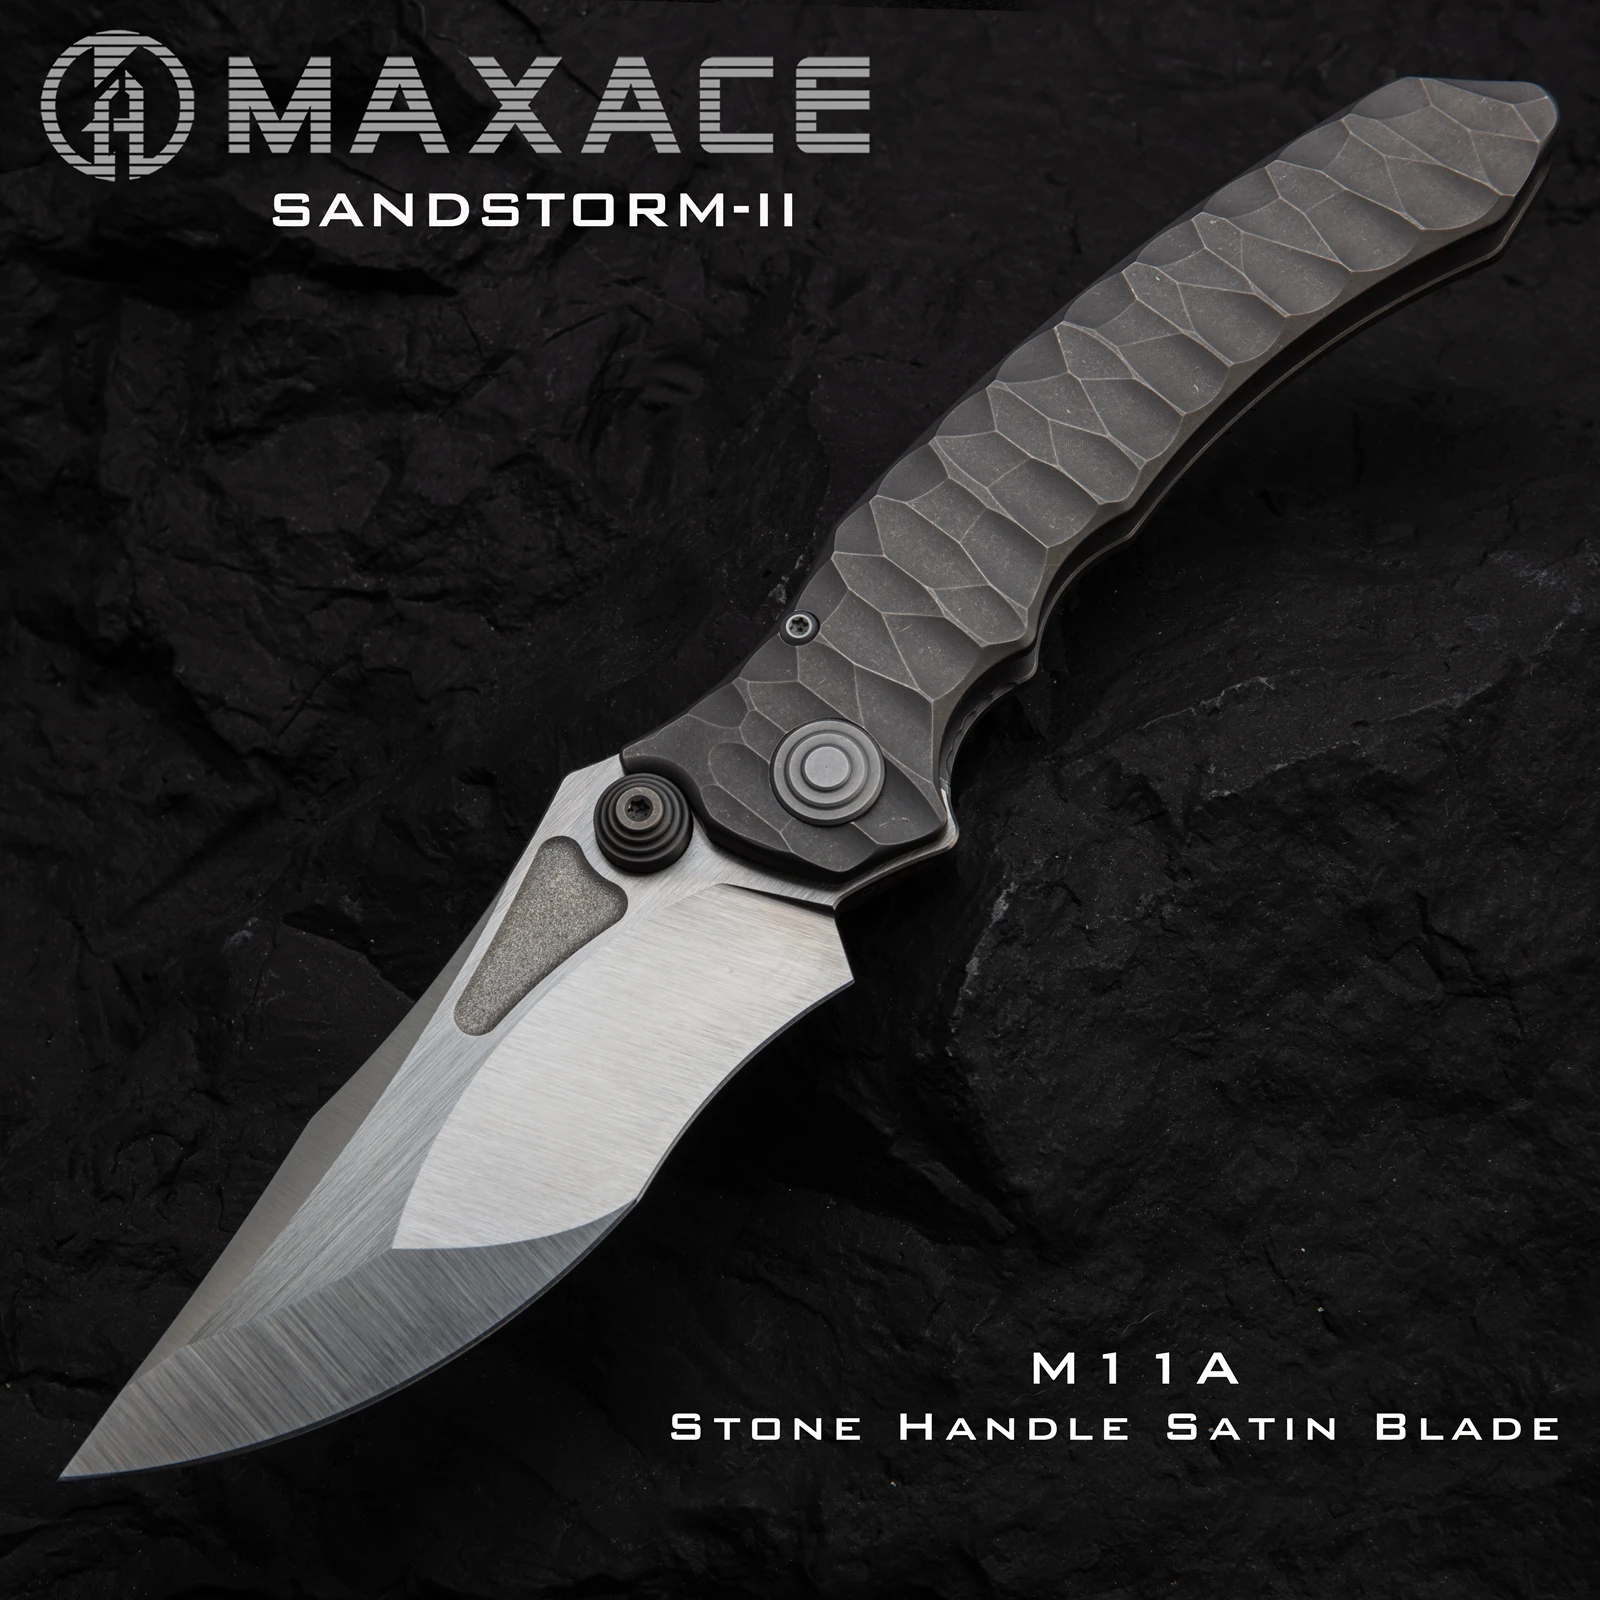 

Maxace Sandstorm-II Folding Knife TC4 Handle M390 Blade Edc Outdoor Hunting Camping Tool Tactical Survival Self-Defense Knives